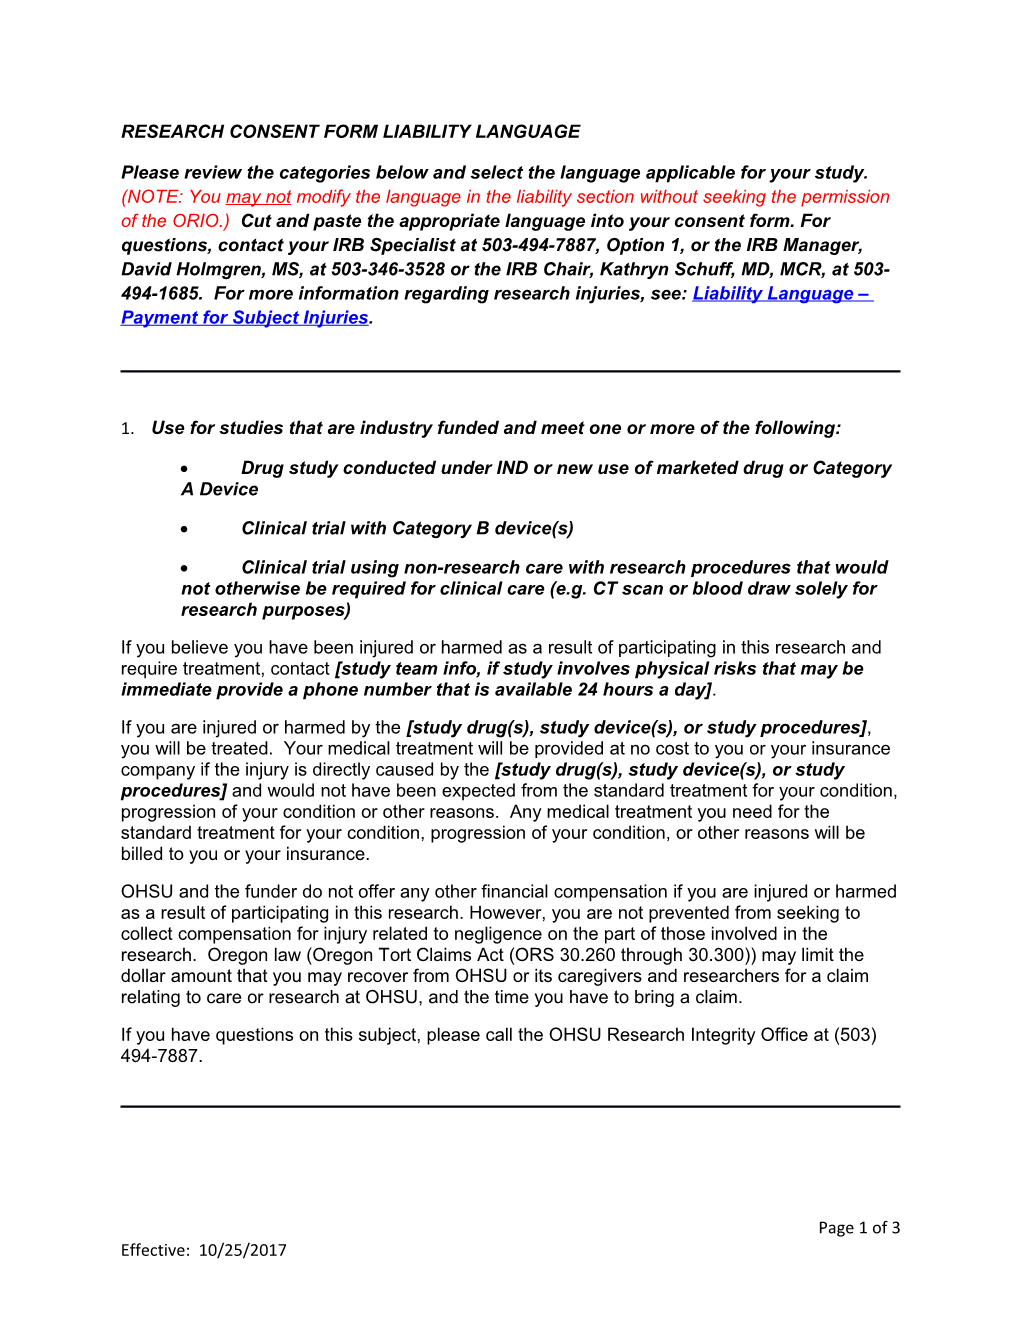 Research Consent Form Liability Language